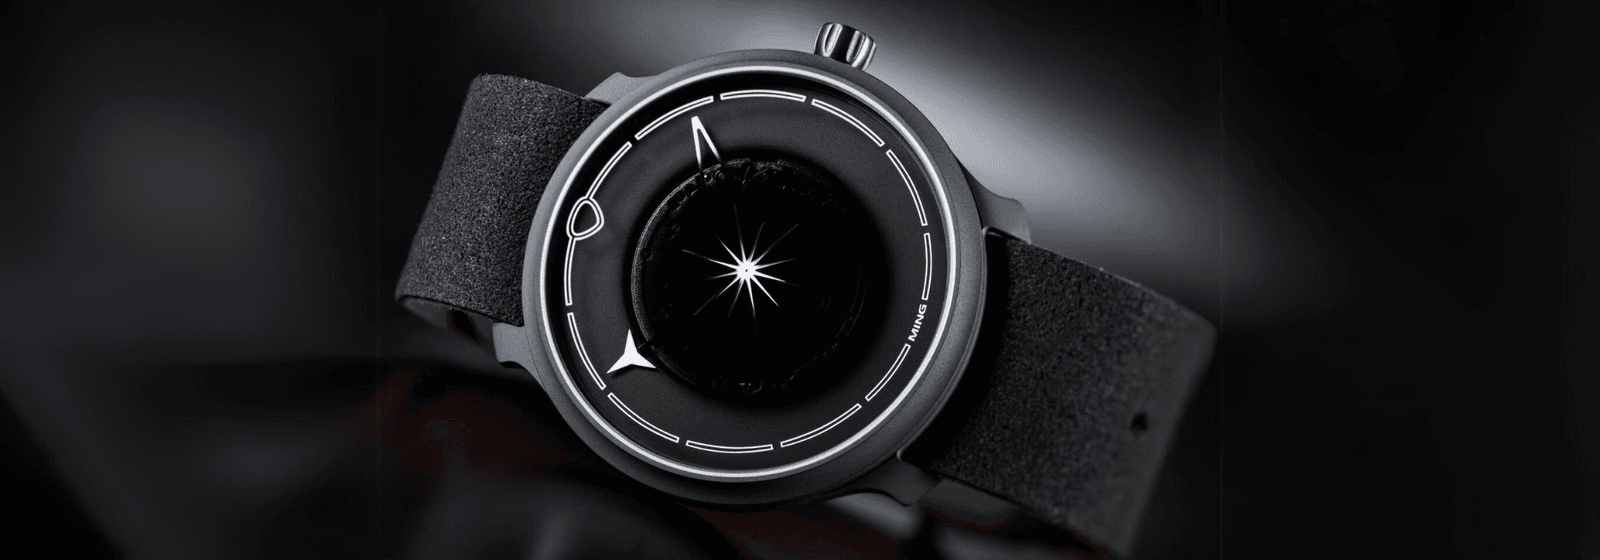 MING Breaks Records With World's Lightest Mechanical Watches